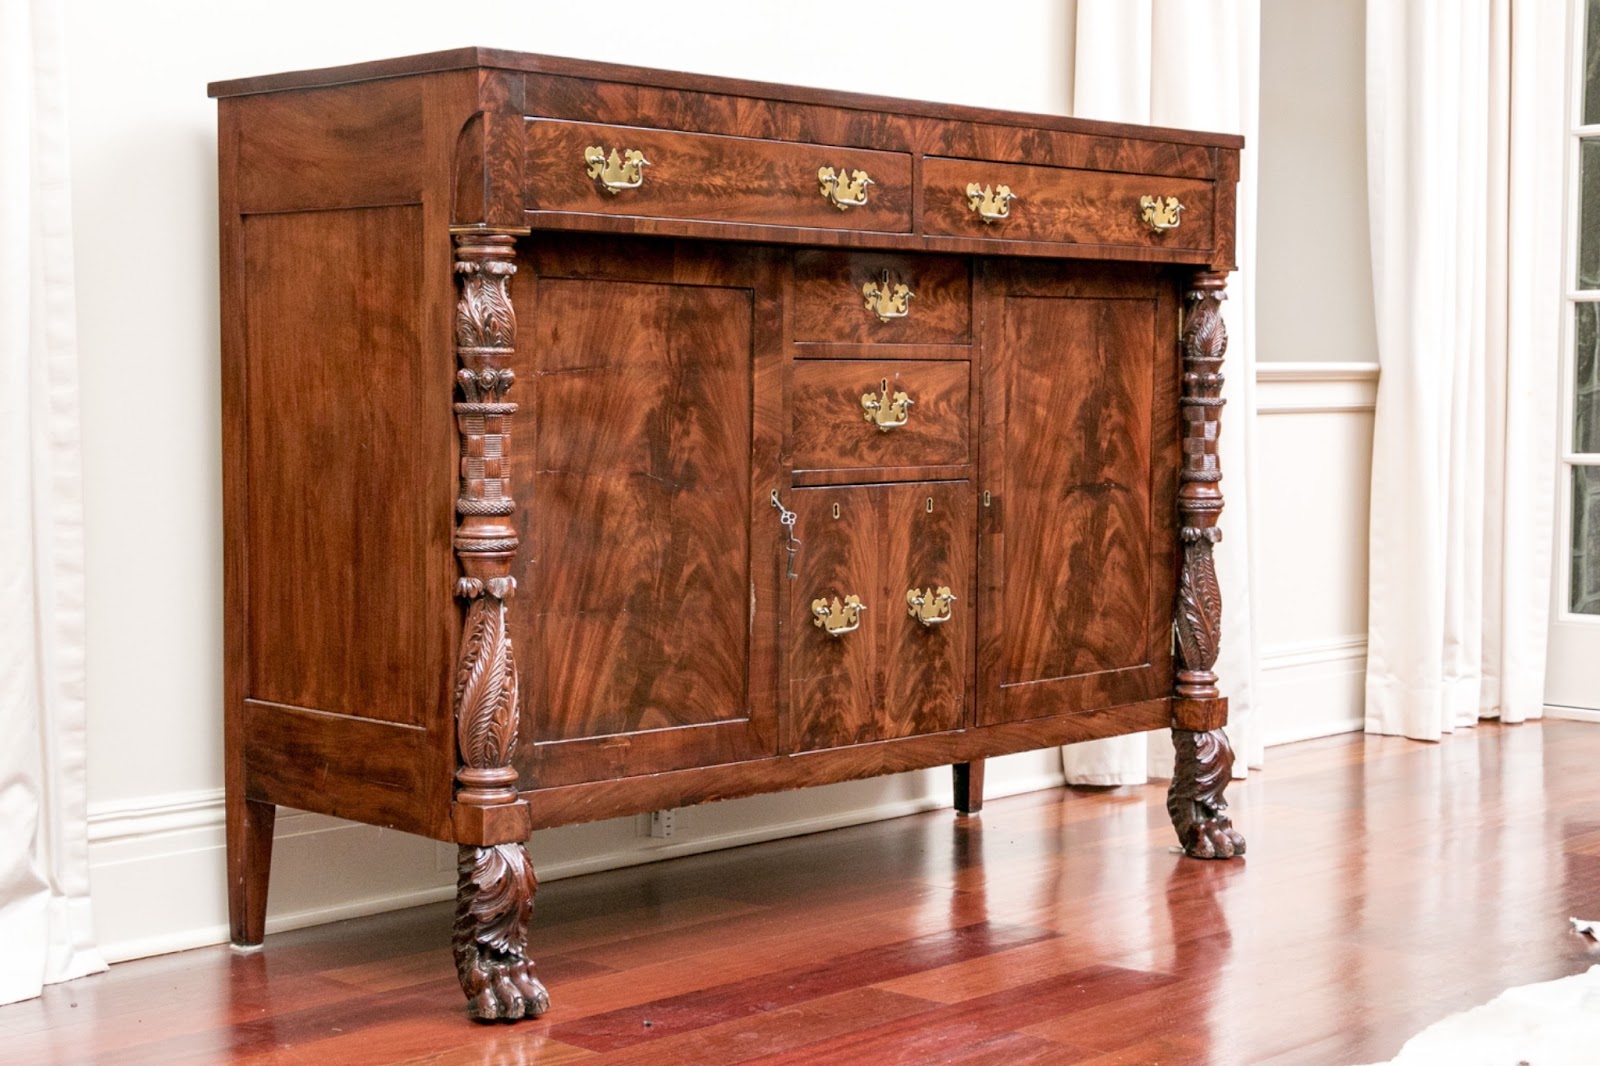 19th century mahogany sigdeboard with intricately carved front legs